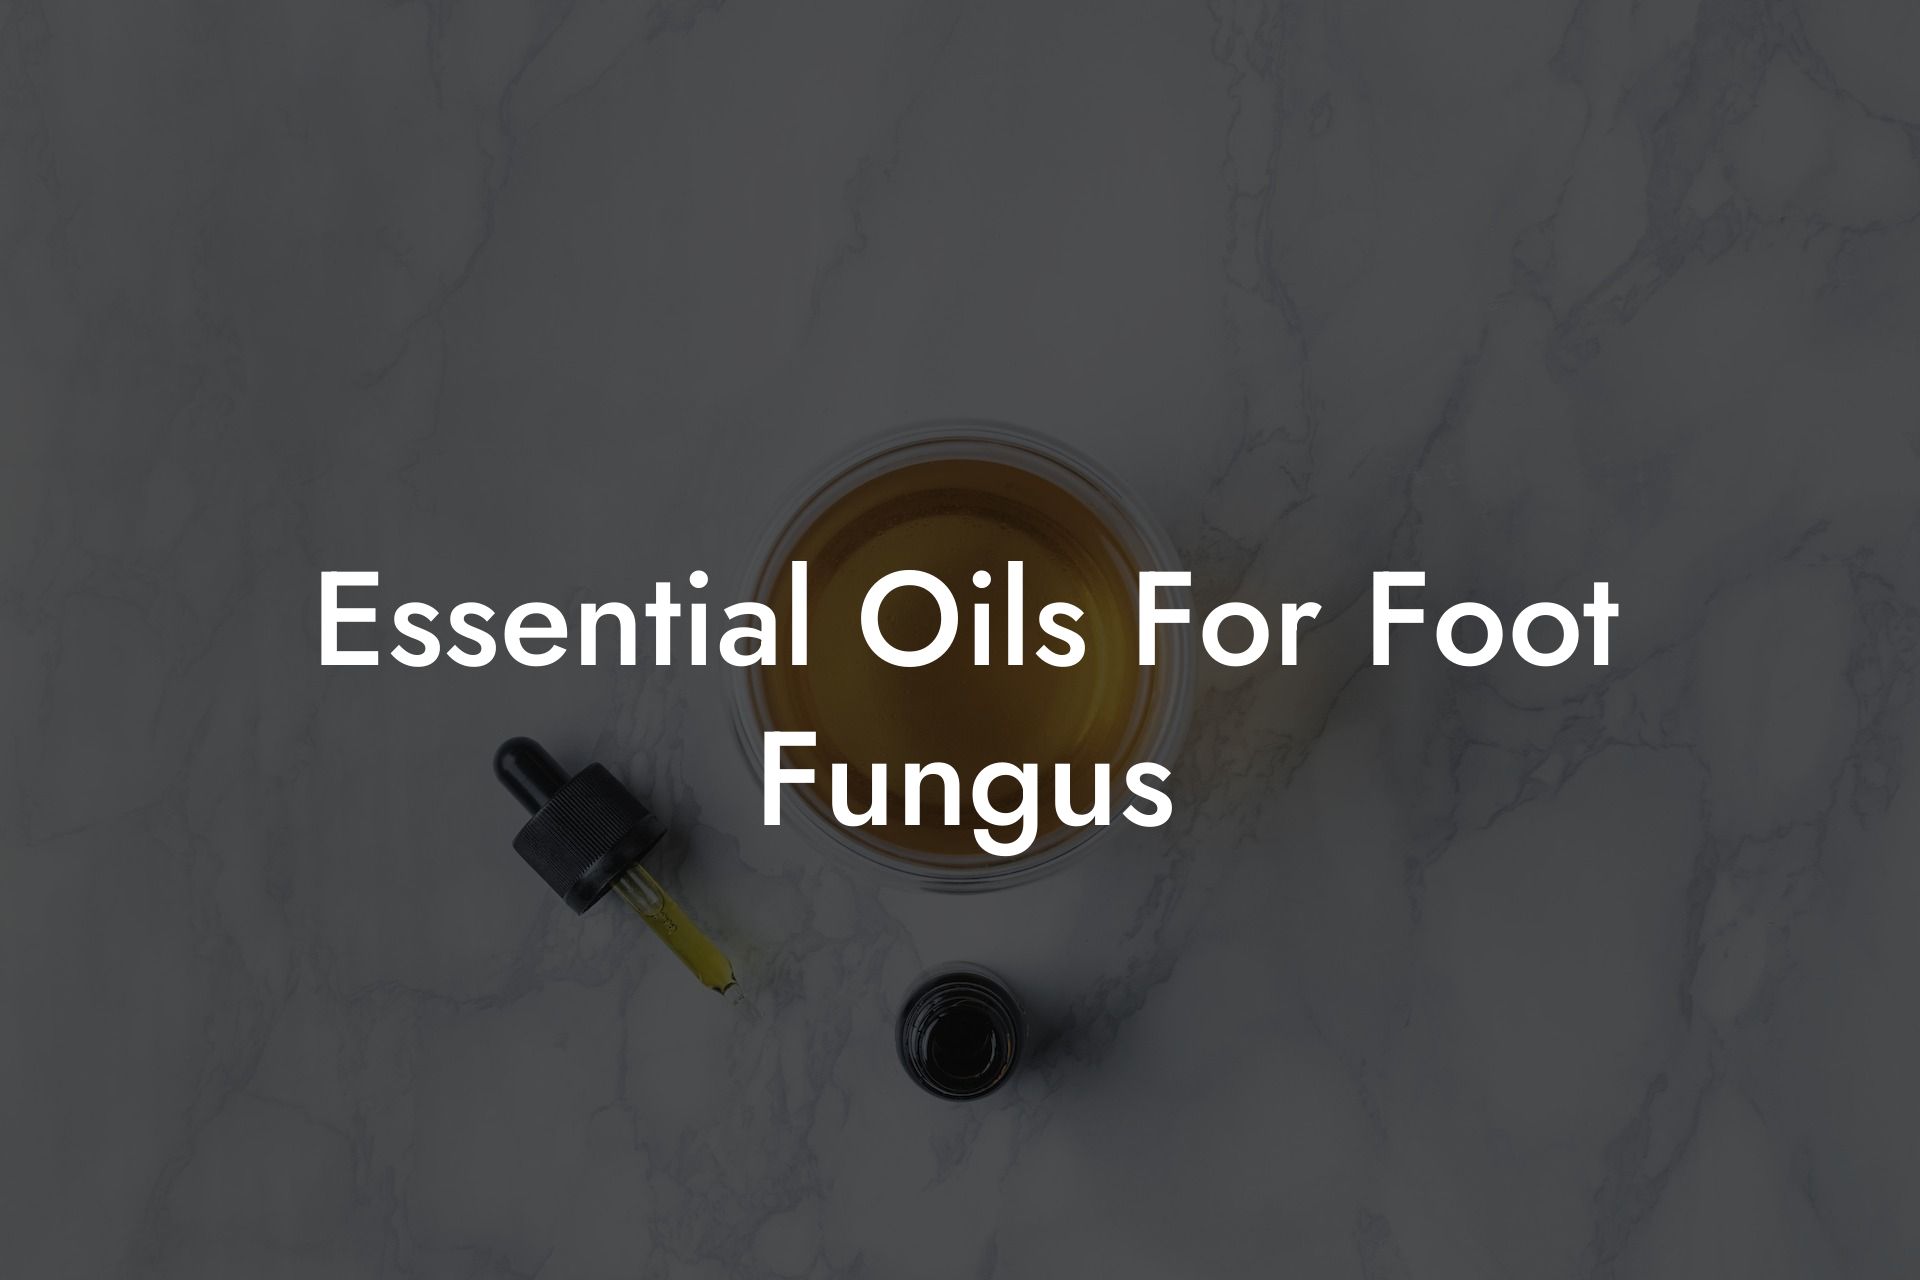 Essential Oils For Foot Fungus